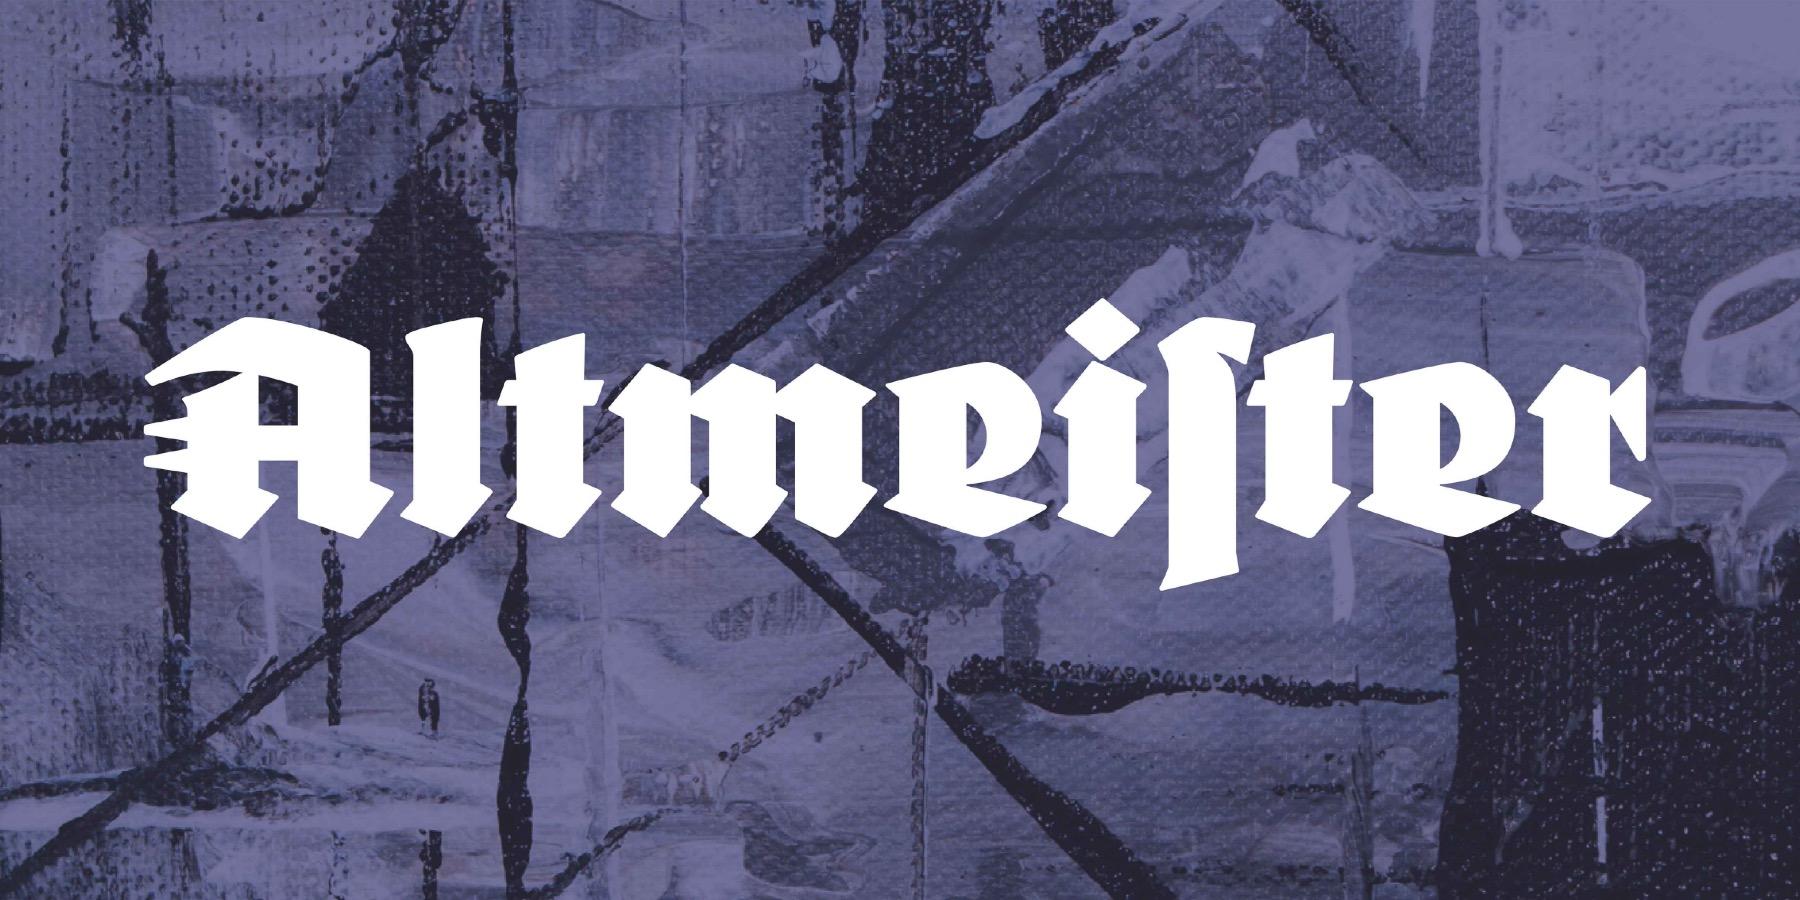 More information about "The Best Free Blackletter Fonts"